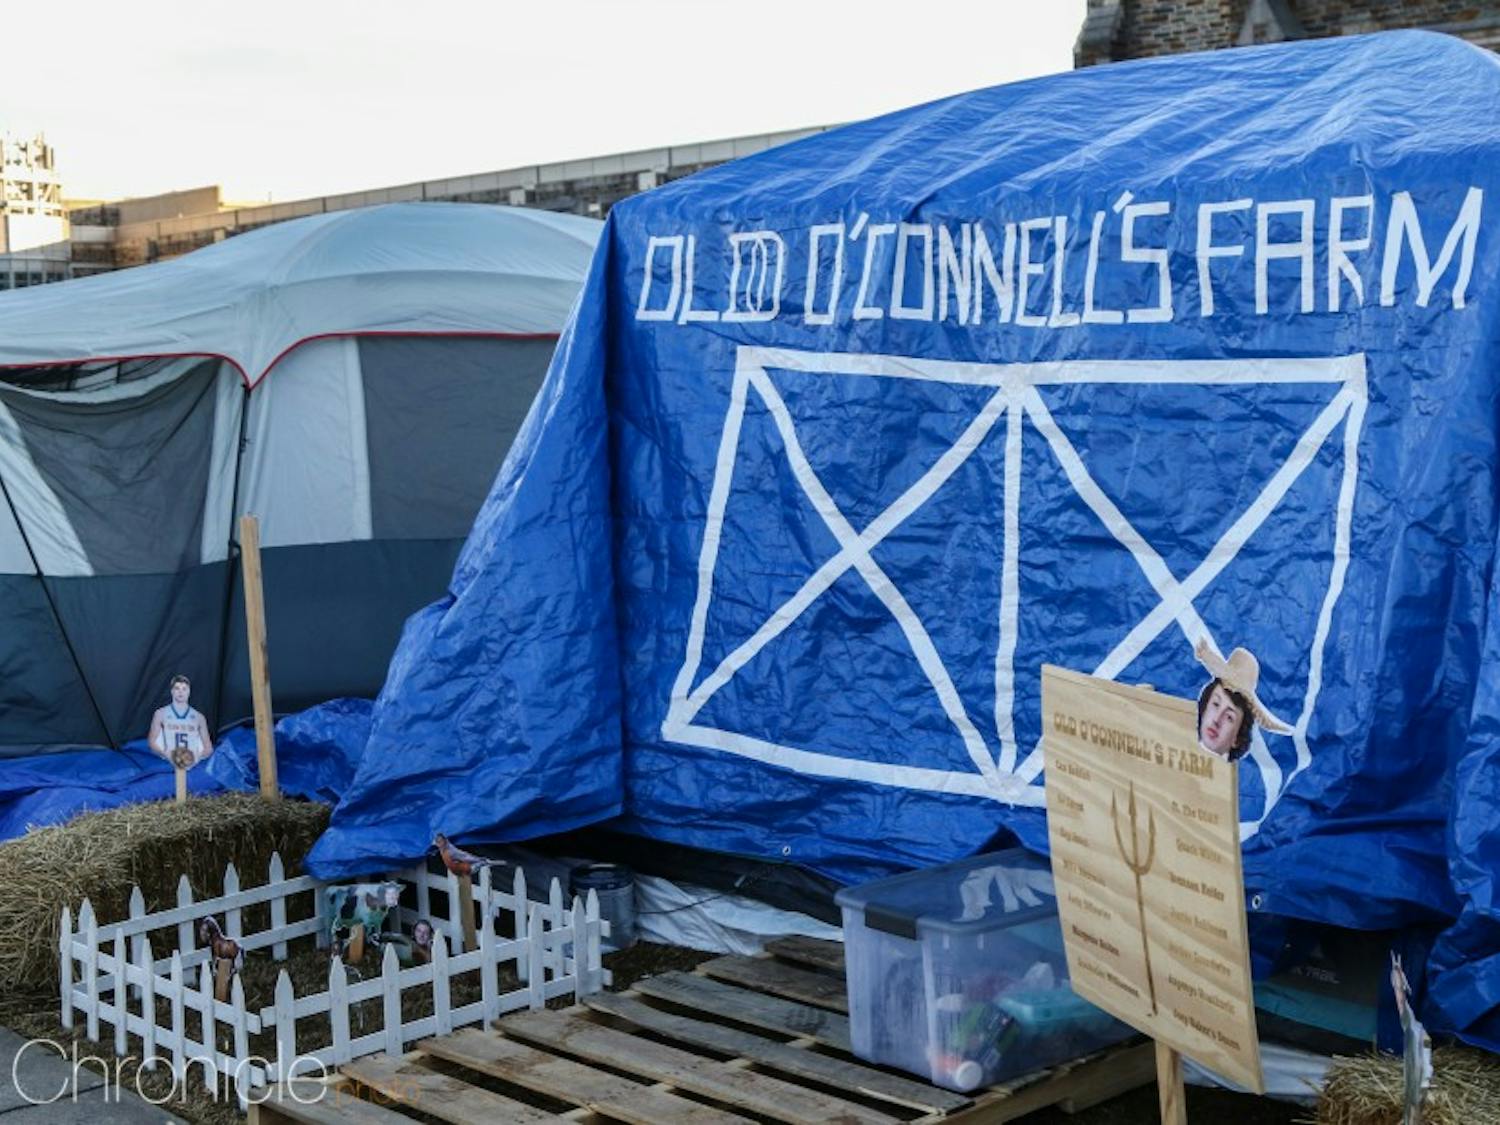 Photography Editor Sujal Manohar stopped by Krzyzewskiville to find the most interesting and creative tents of the 2019 tenting season.&nbsp;